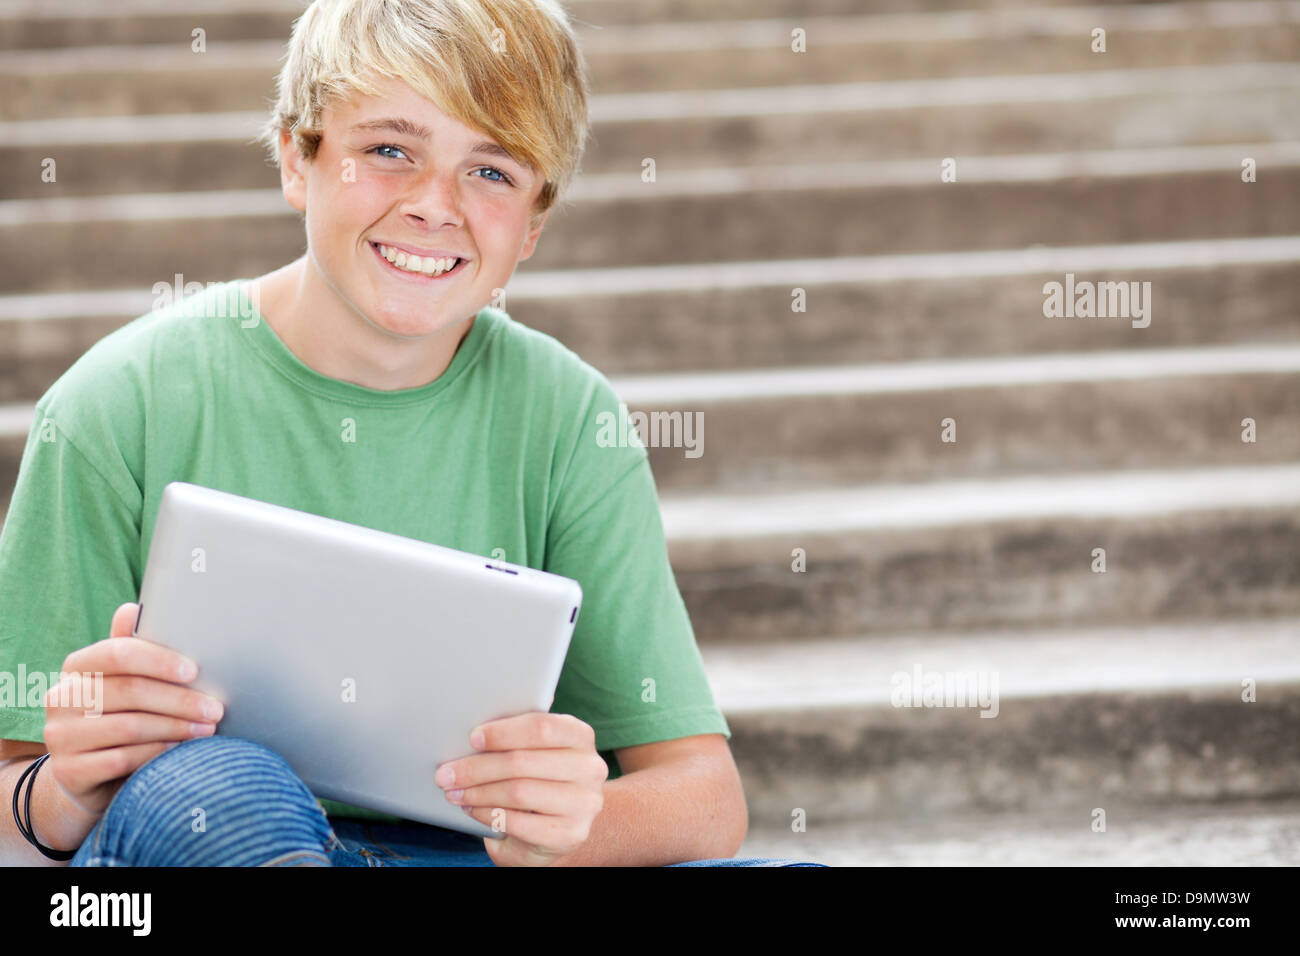 young teen boy using tablet computer Stock Photo